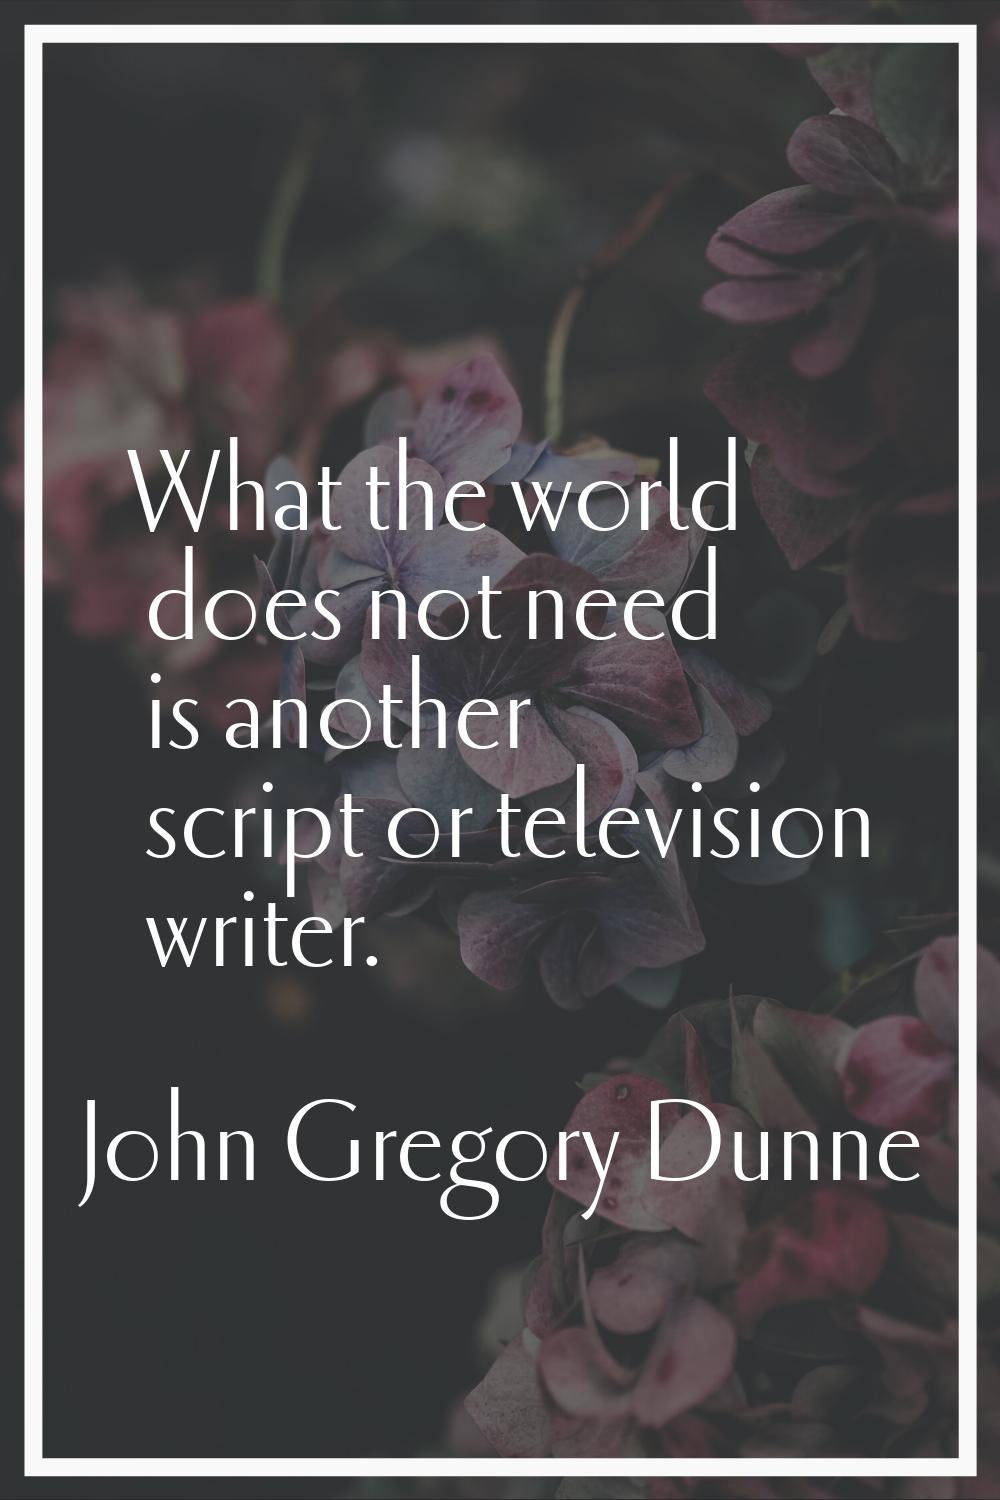 What the world does not need is another script or television writer.